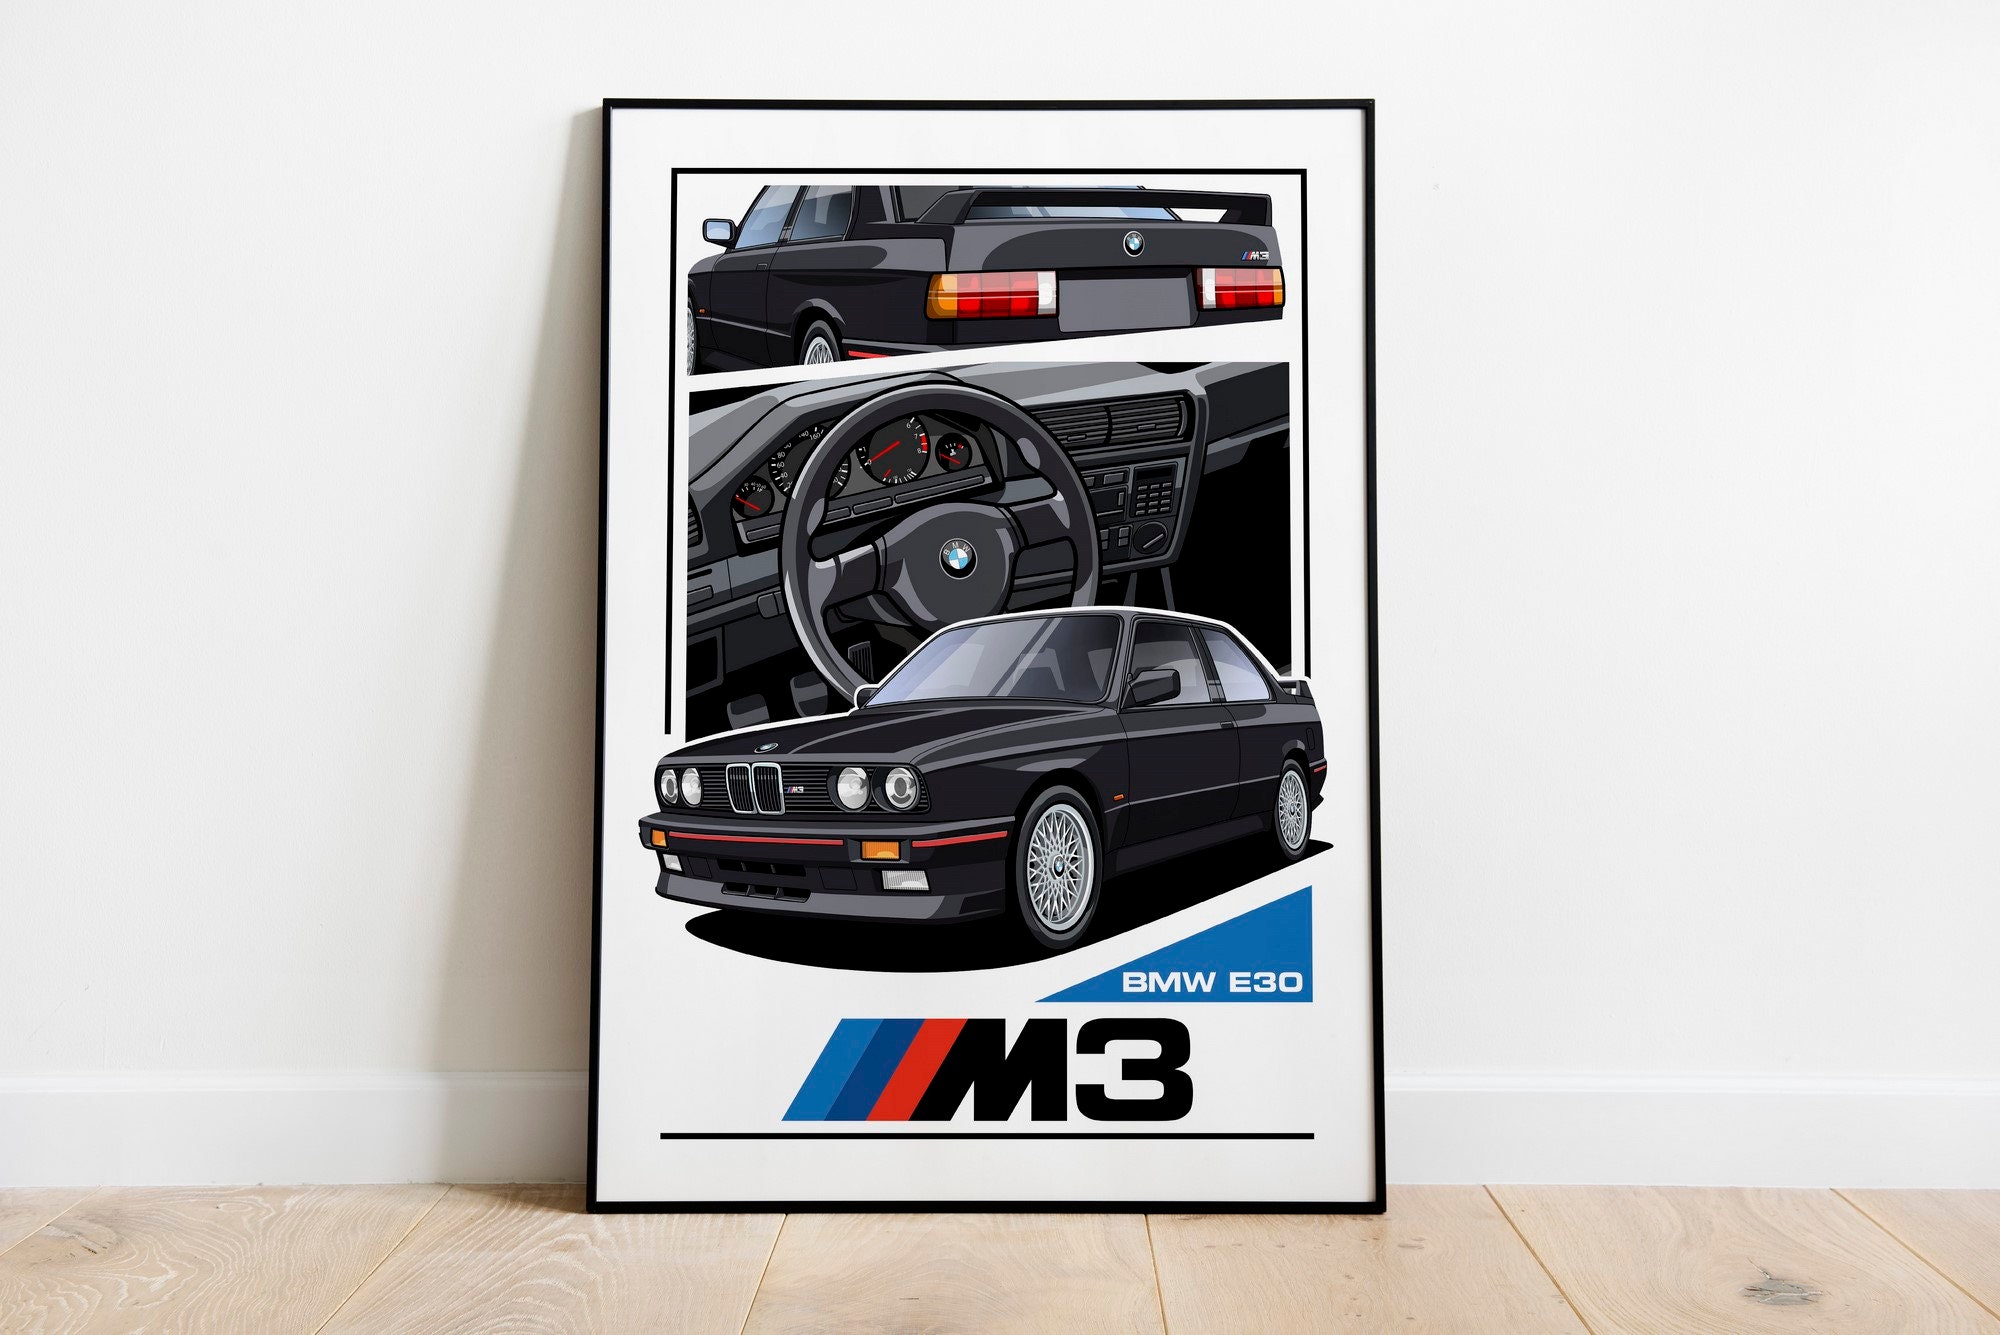 BMW E30 M3 M-power Poster Bmw Car Wall Poster Black Classic Car Poster  Vintage Saab Poster Art Gift Room 